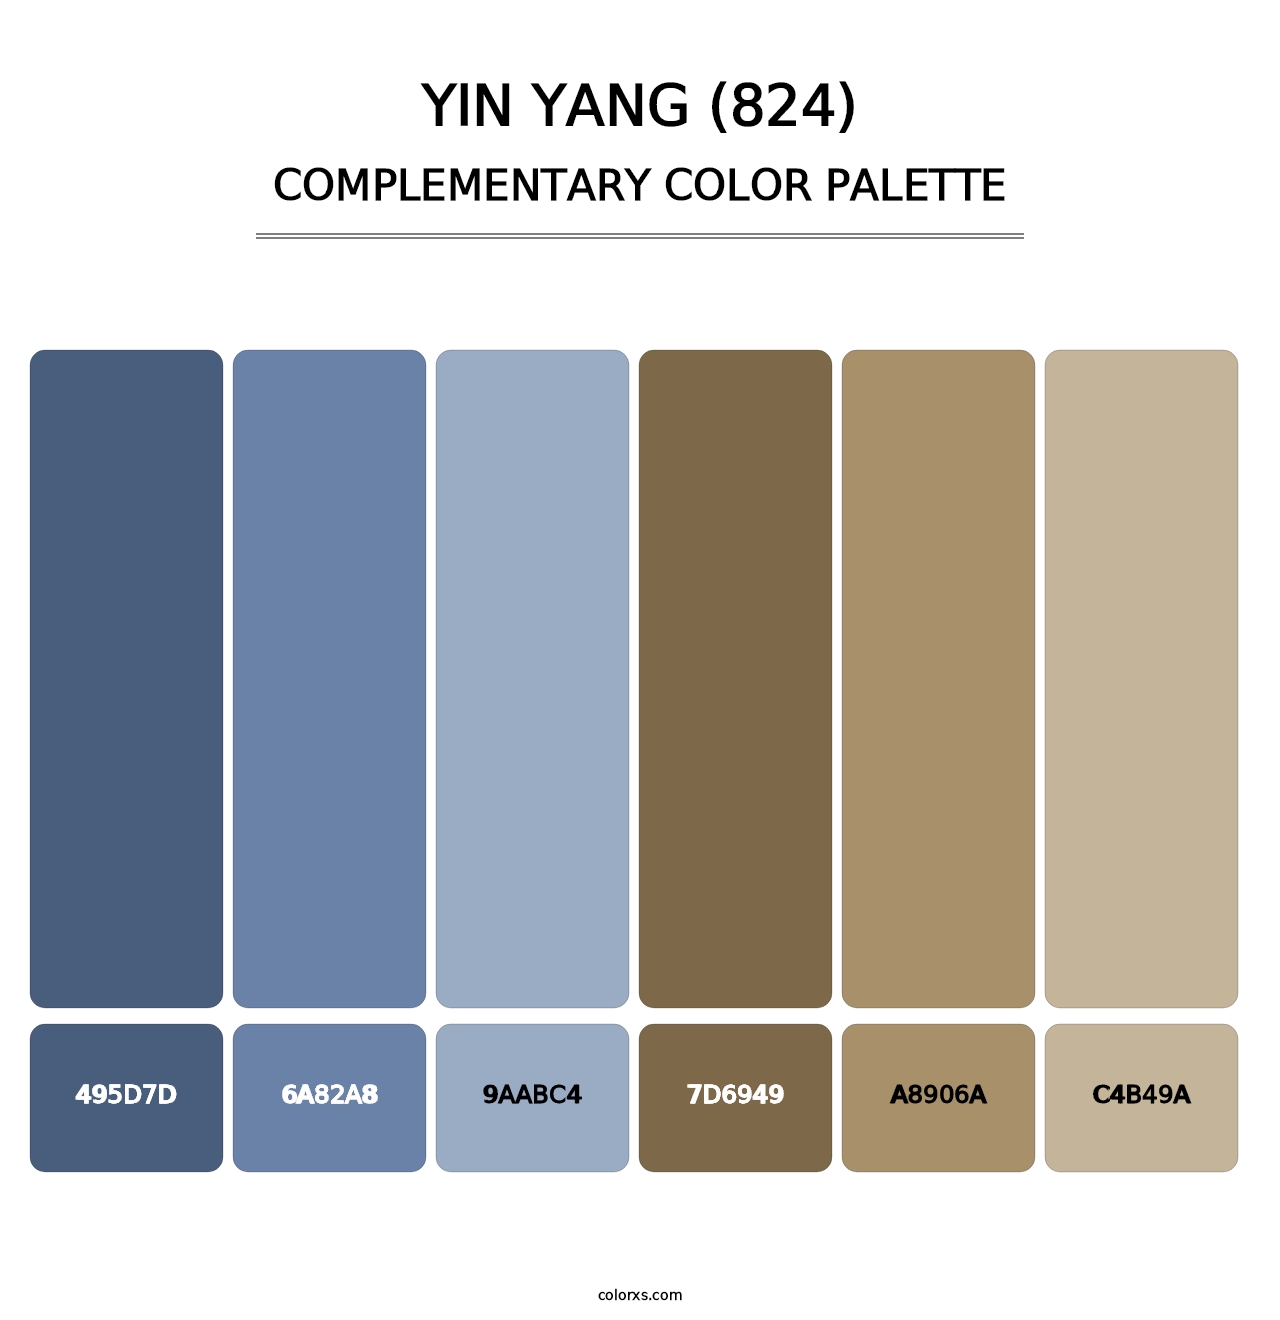 Yin Yang (824) - Complementary Color Palette